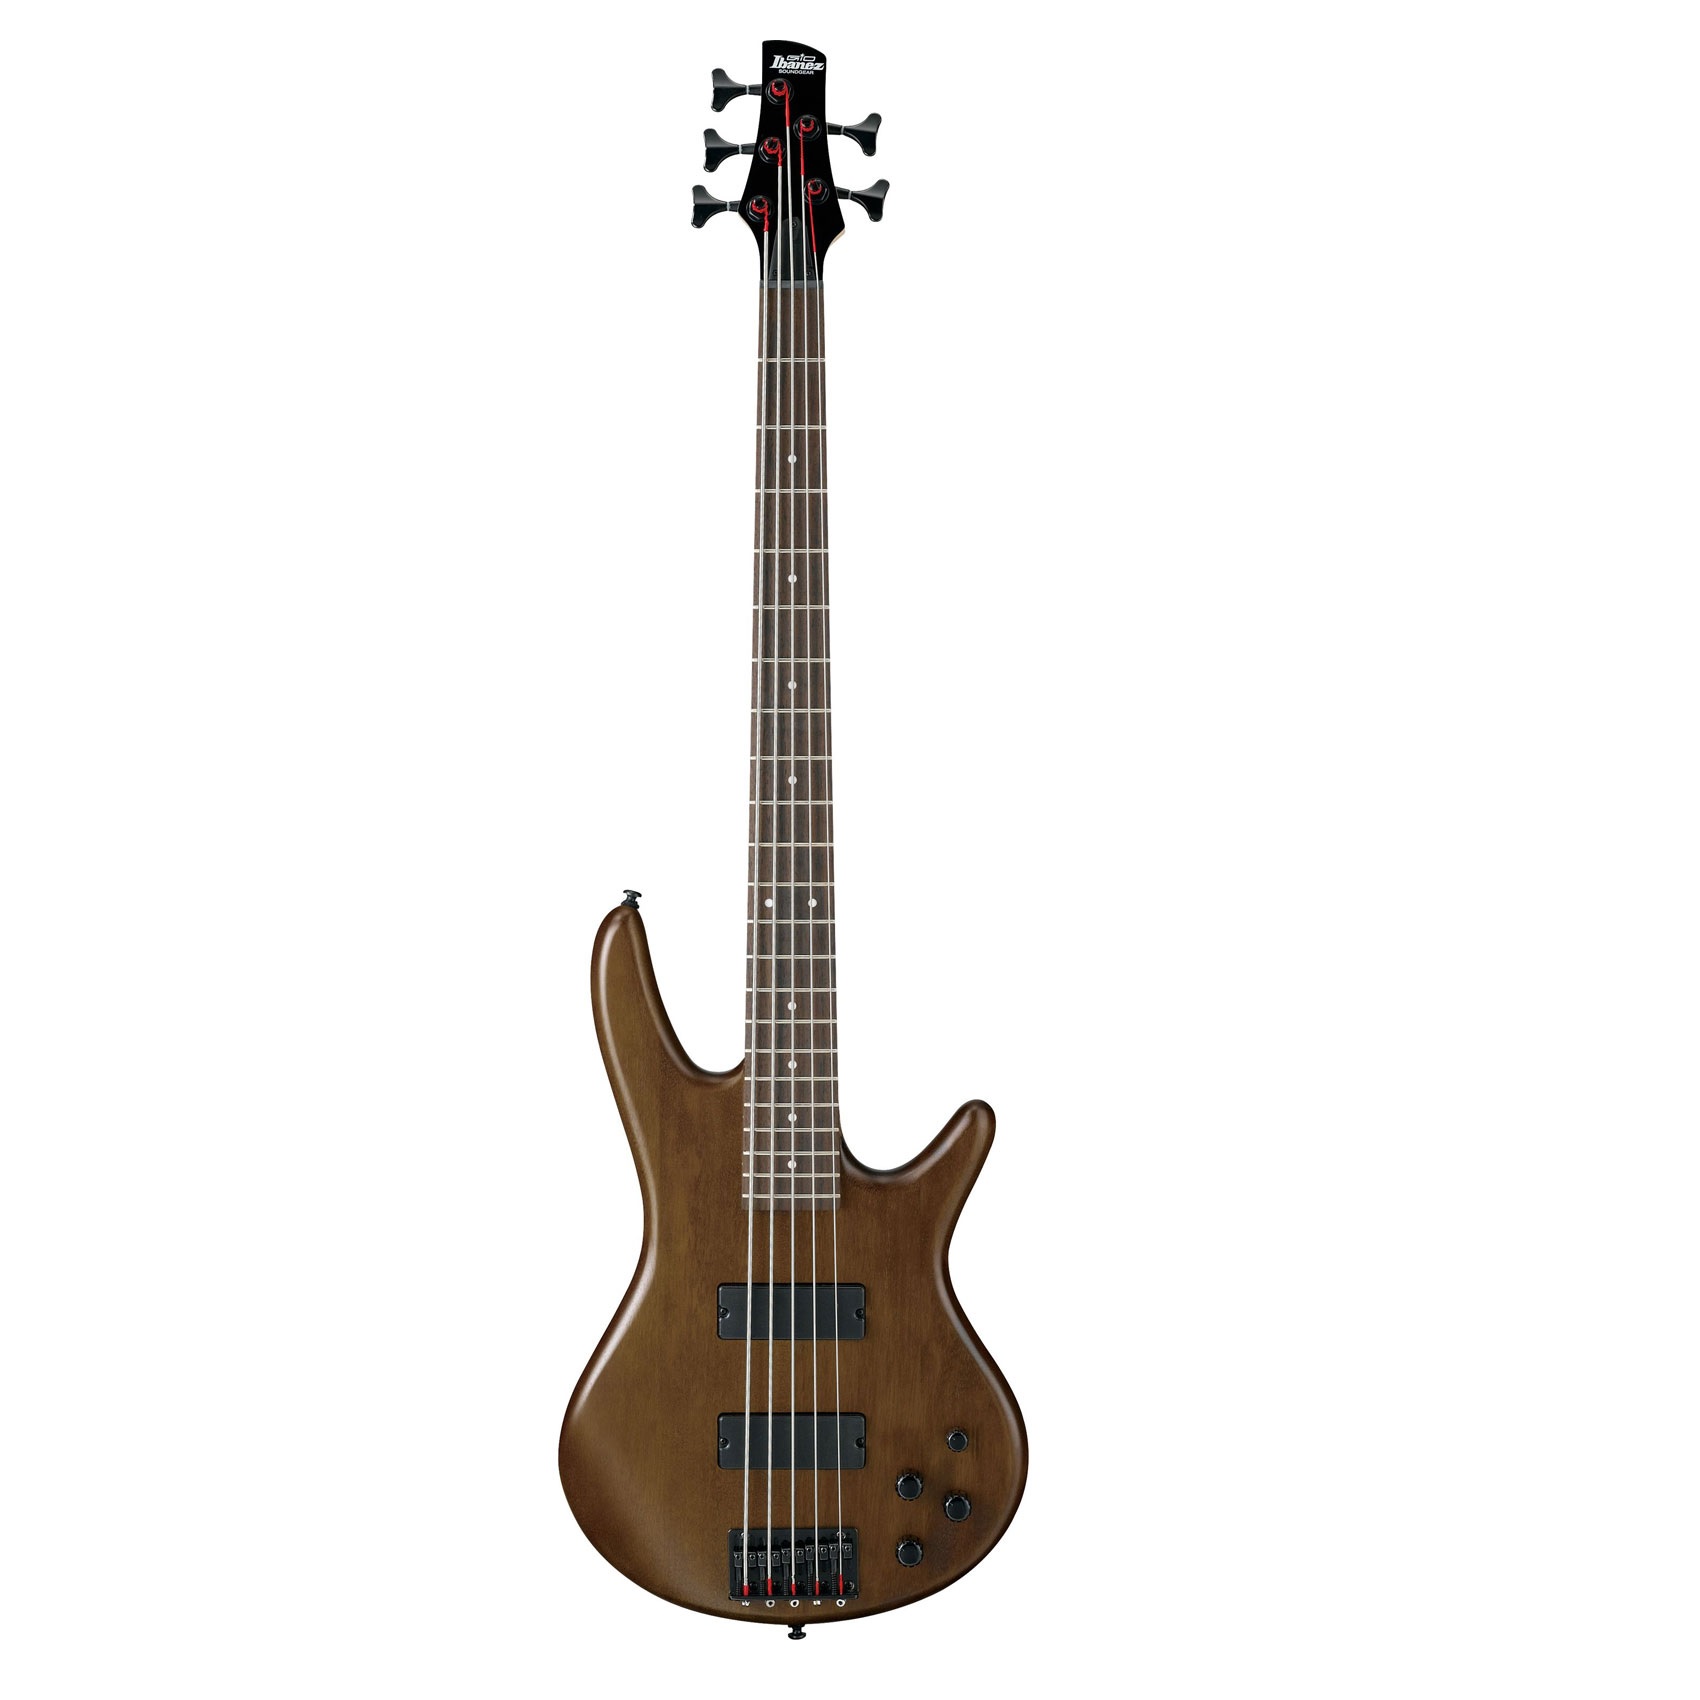 Buy Ibanez GSR205BWNF Bass Guitar online in India